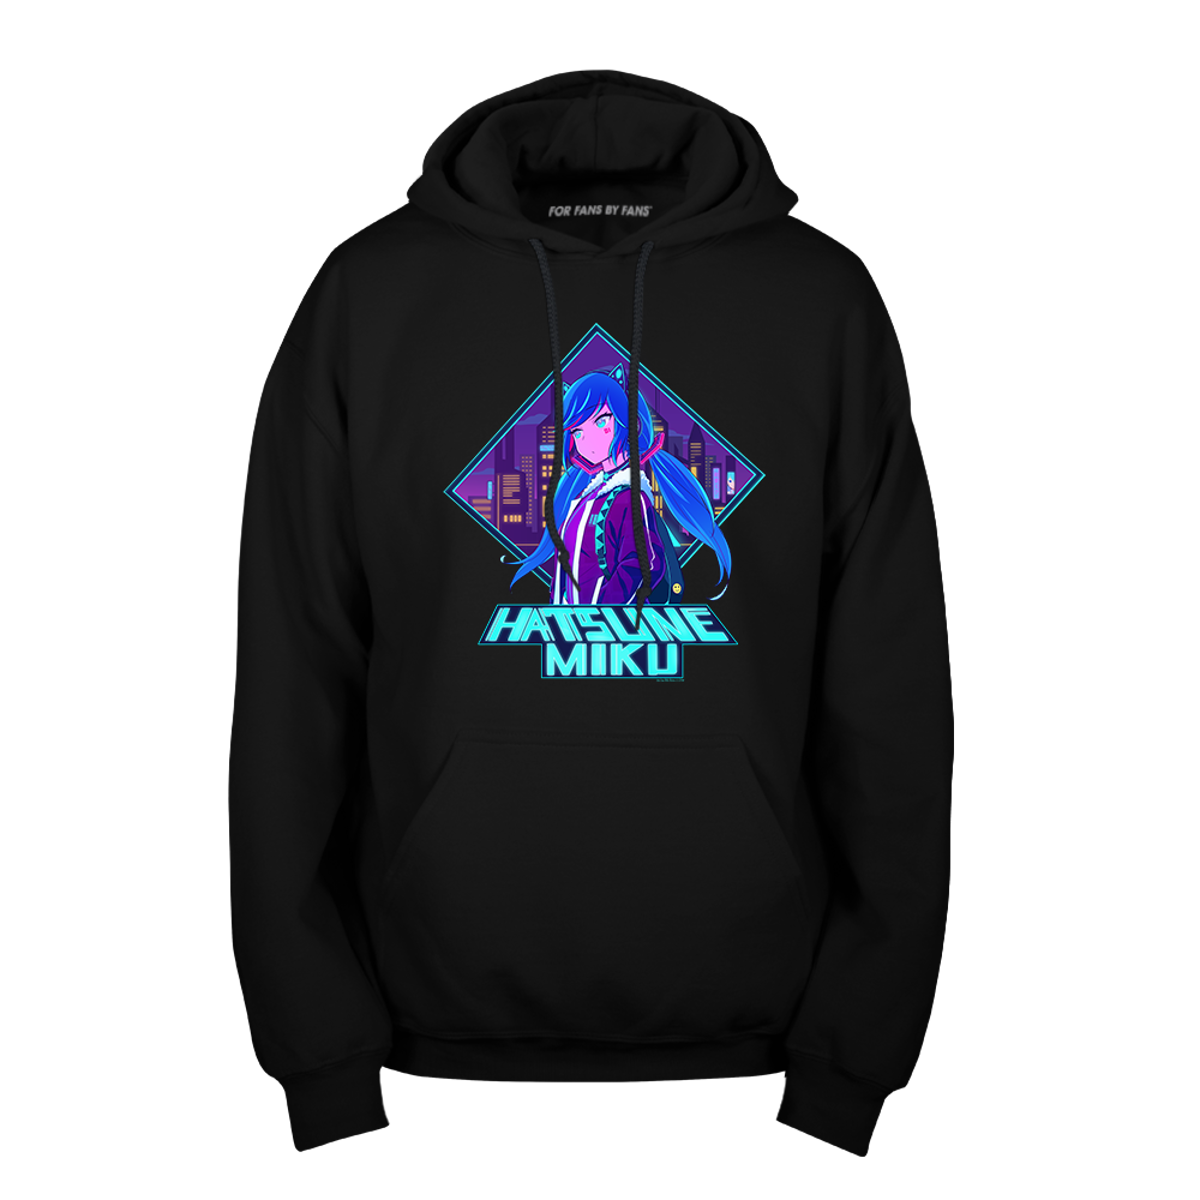 Double Life Pullover Hoodie